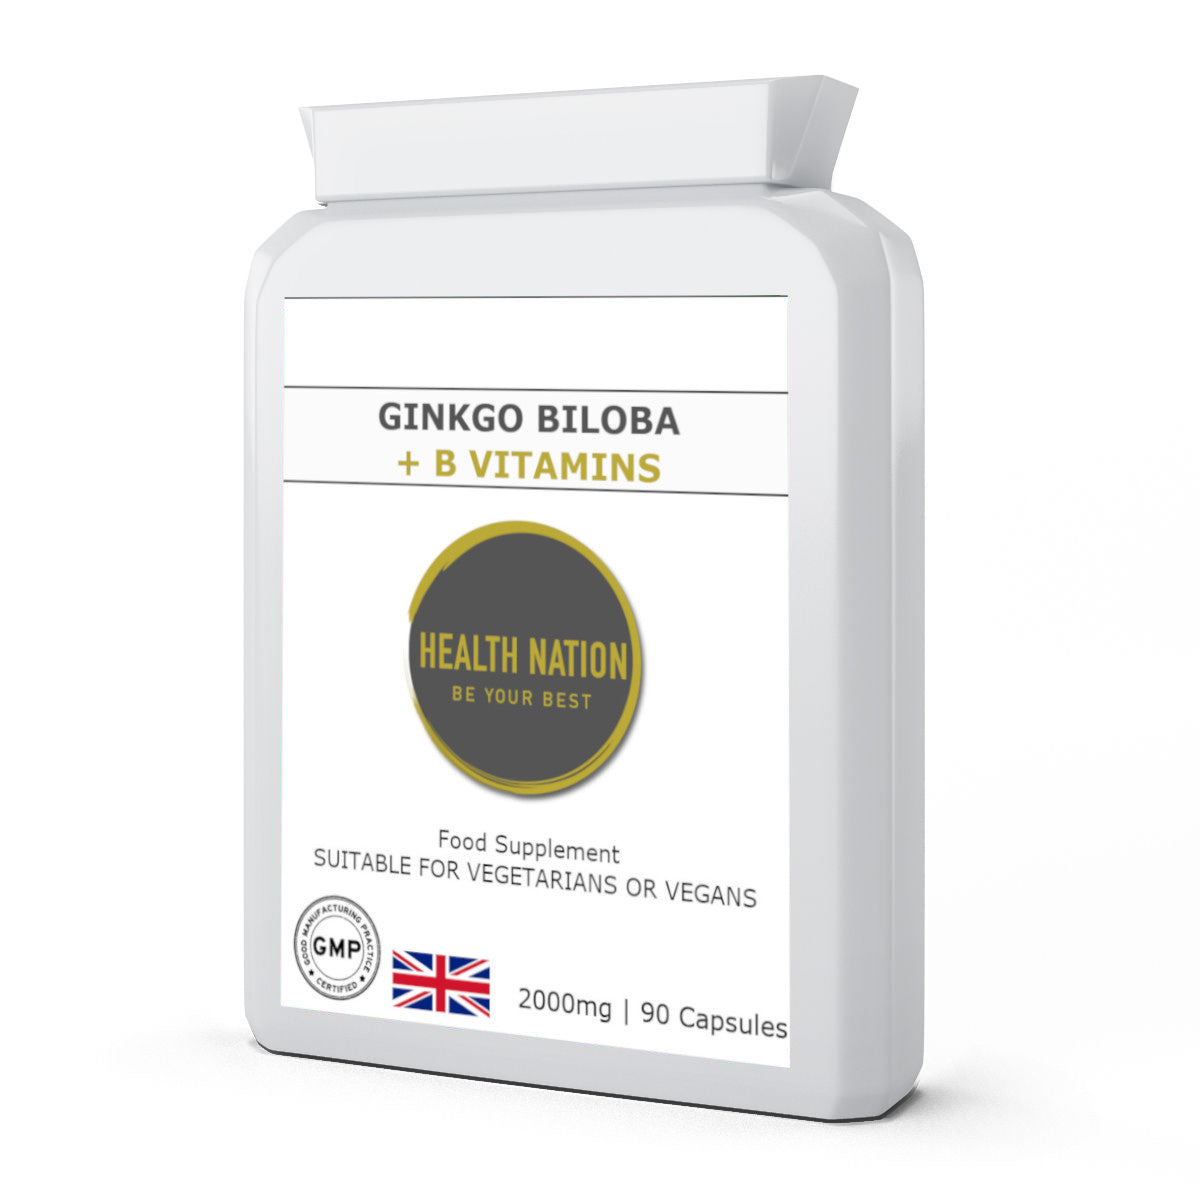 Ginkgo Biloba B+ | Helps with Mental Clarity, Focus, Mood, Energy, Anti-Ageing and Eye Health | Made in UK | 2000mg 90 Capsules - Health Nation